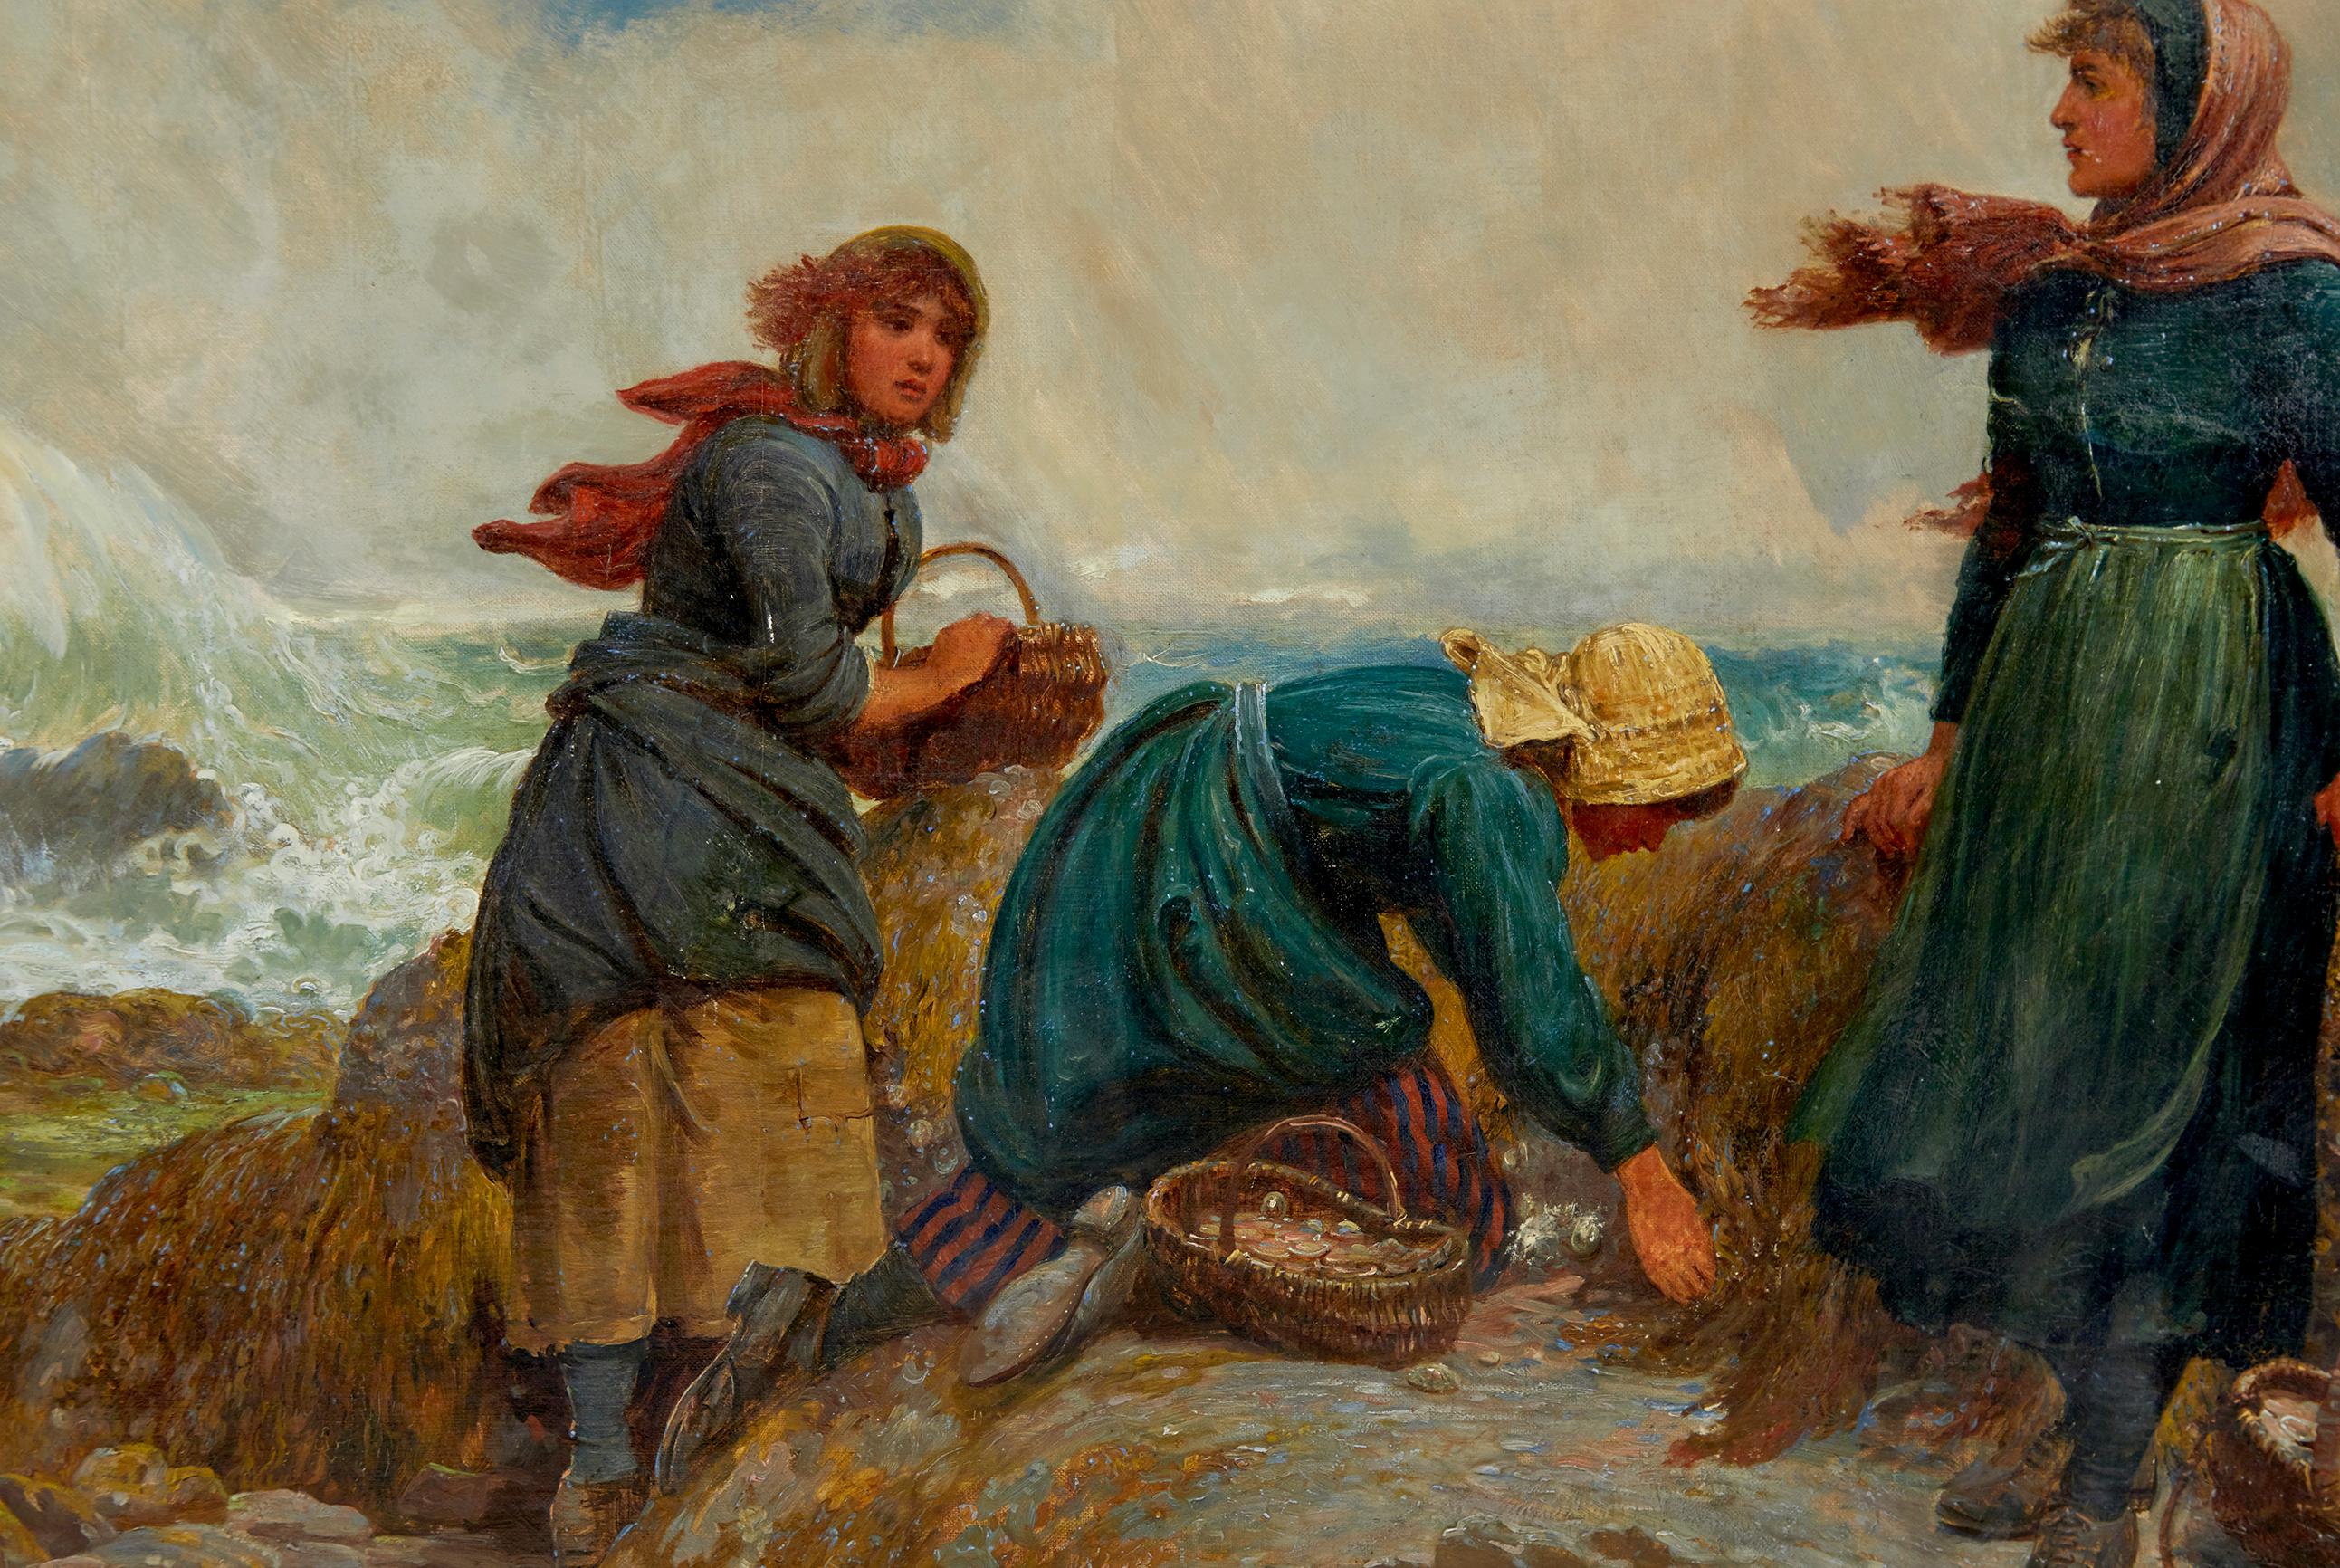 19th century oil painting of yorkshire flither pickers by robert farren circa 1890.

Painted by robert b. Farren (1832-1912)

This is a a skilfully executed and coloured oil painting by robert farren in the social realist style, created towards the